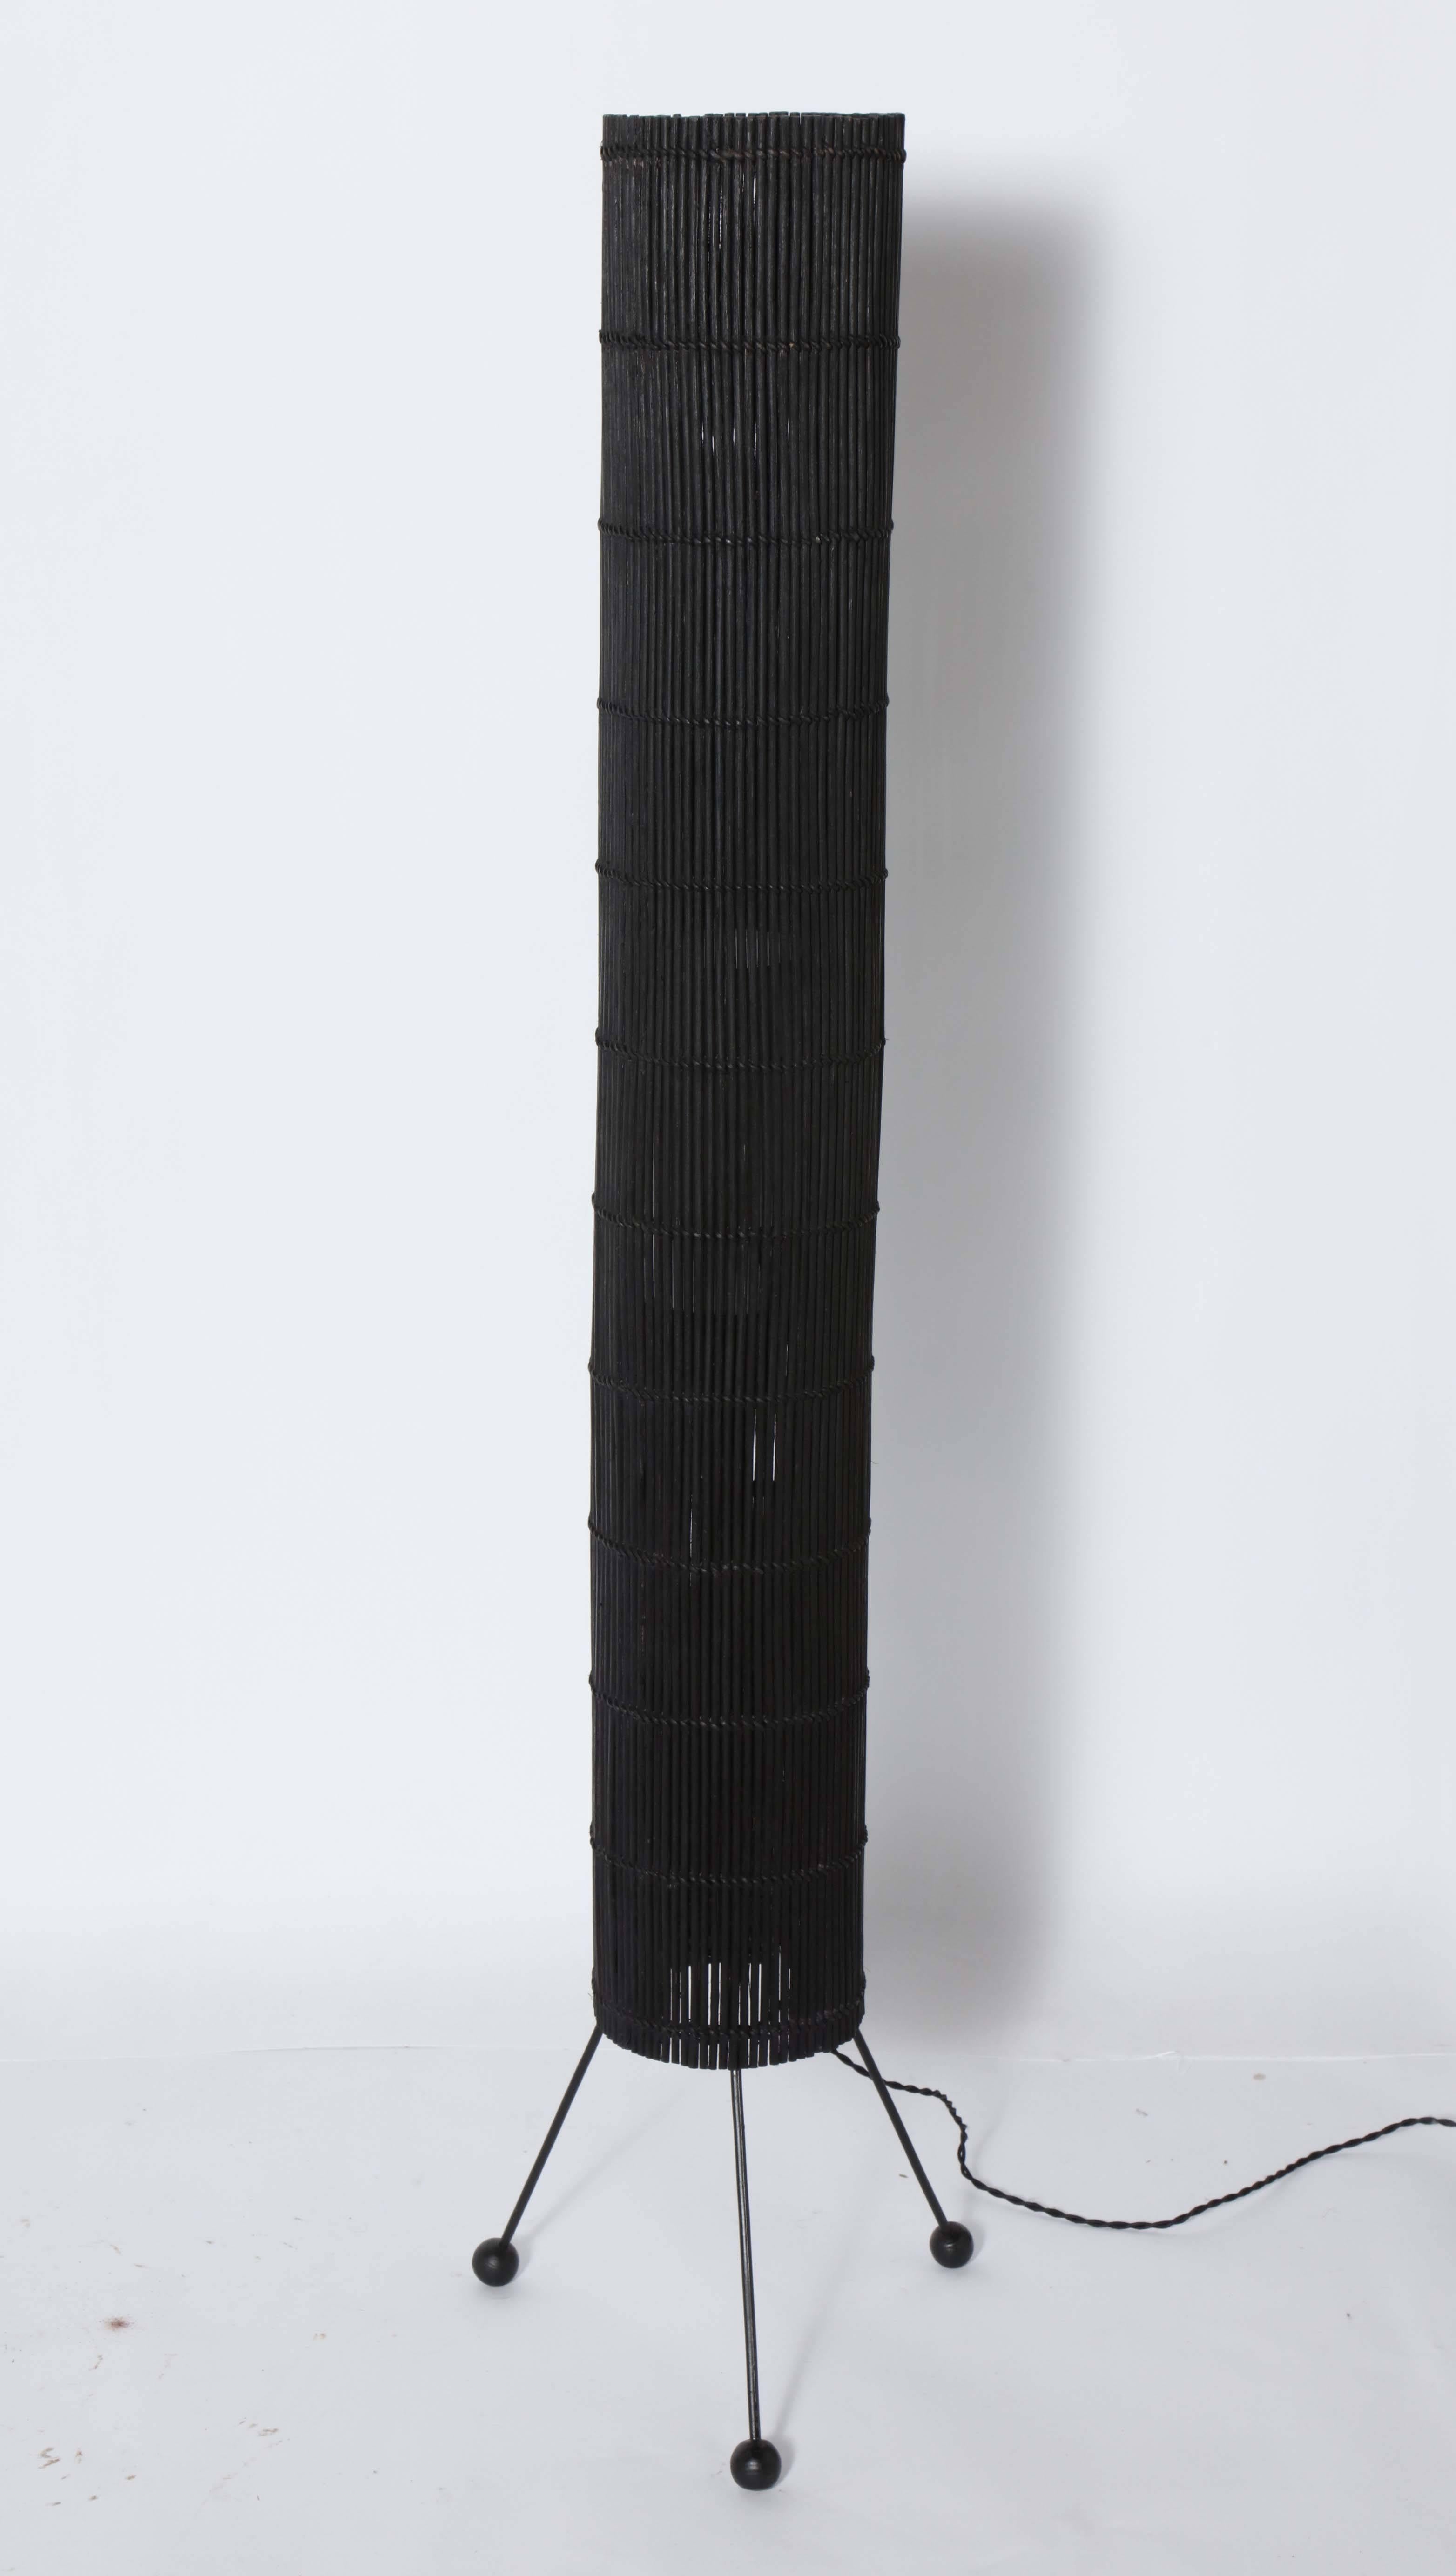 Tall California Contemporary Woven Black Rattan Floor Lamp, in the manner of Tony Paul for Raymor.  Featuring a slender Organic Modern cylindrical Black wicker Shade, narrow cylindrical interior White Linen Shade (4.25D x 8H), on Black Wrought Iron